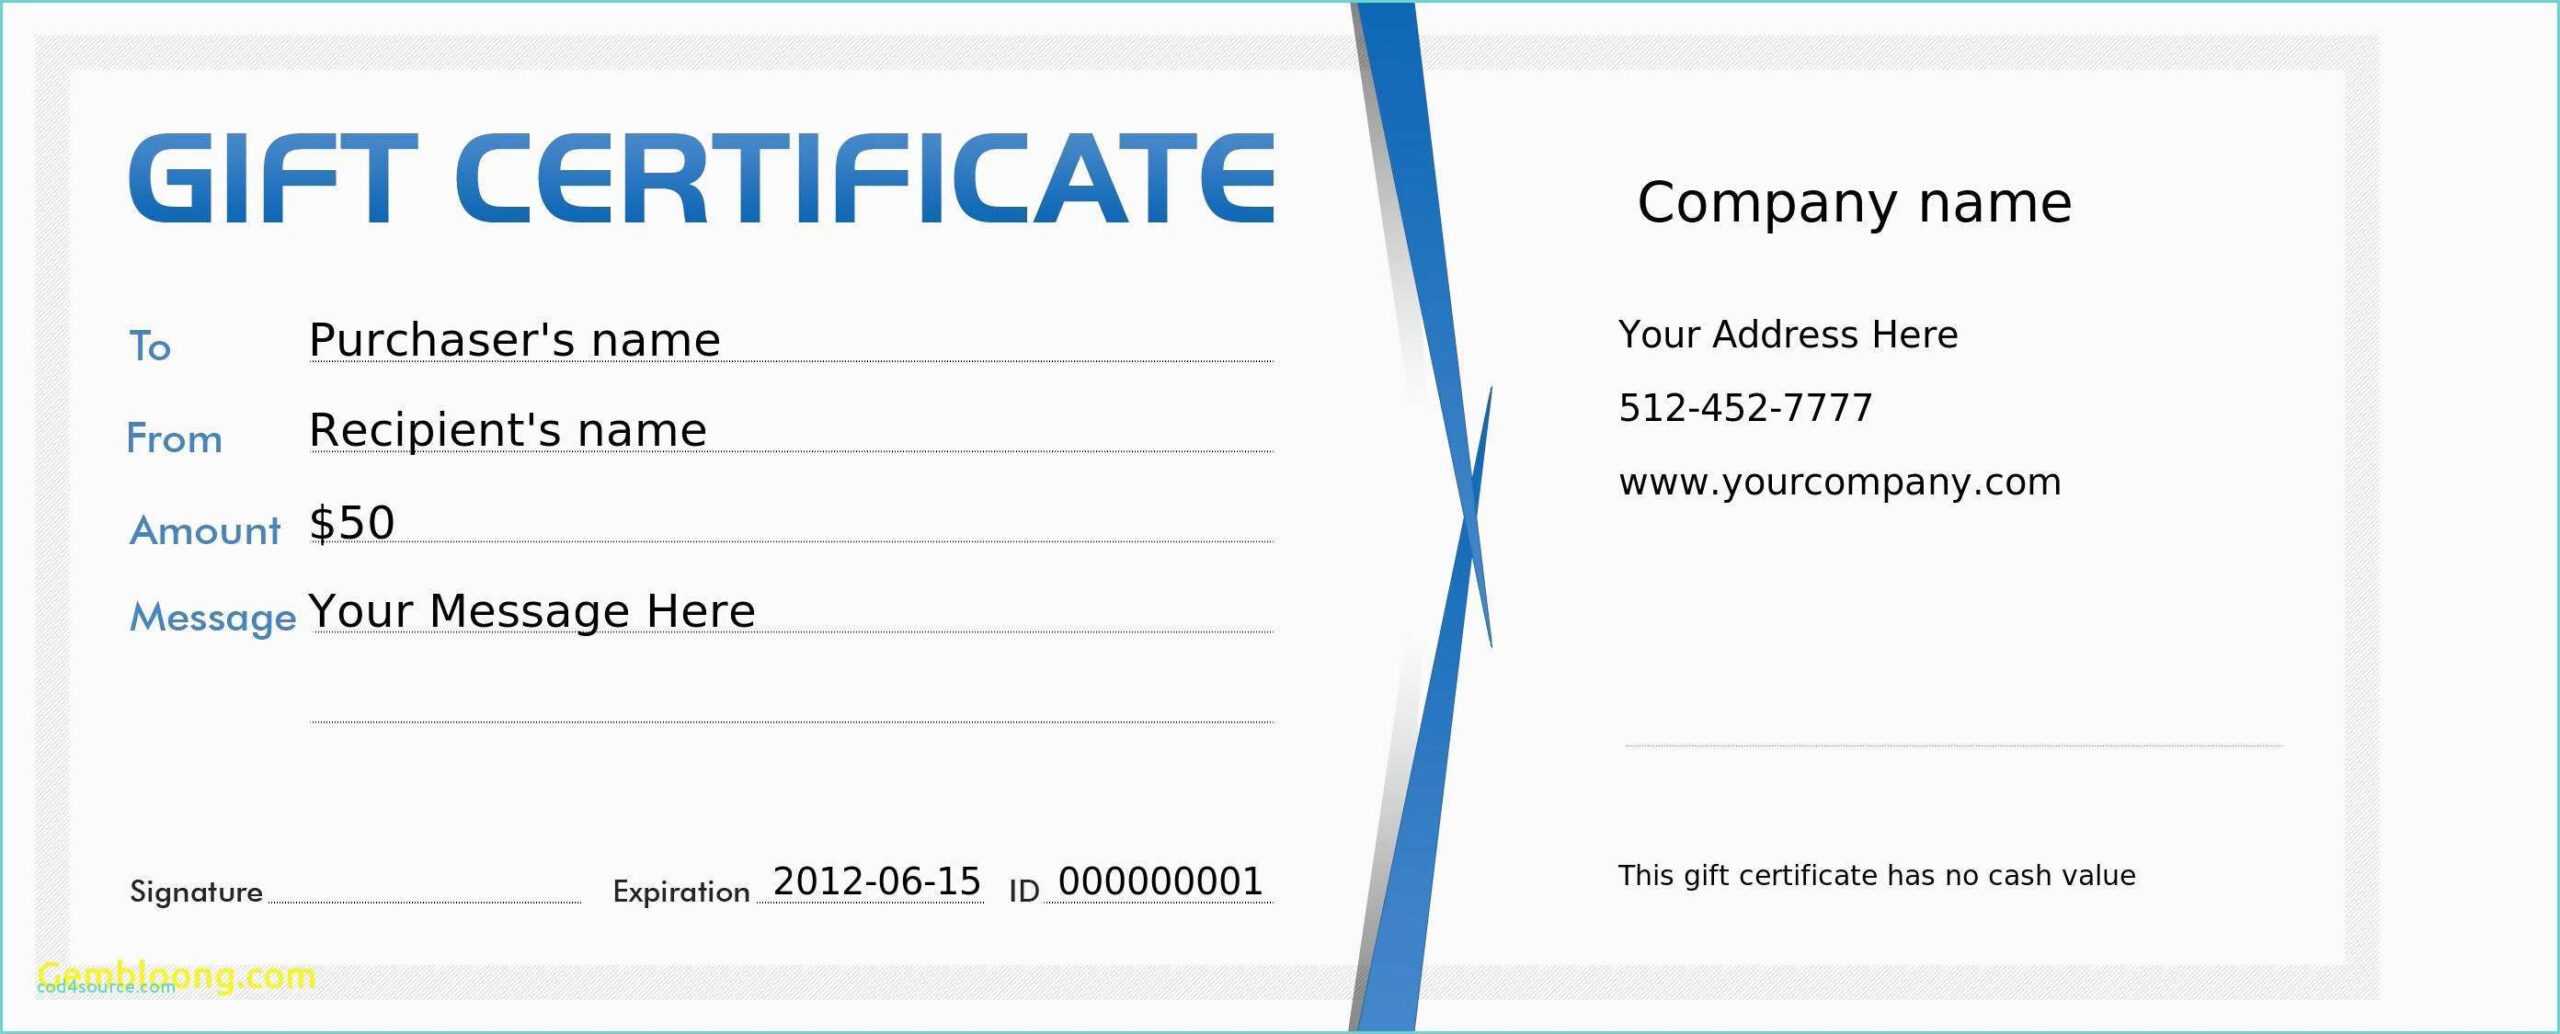 Gift Certificate Template Microsoft Publisher With Regard To Gift Certificate Template Publisher